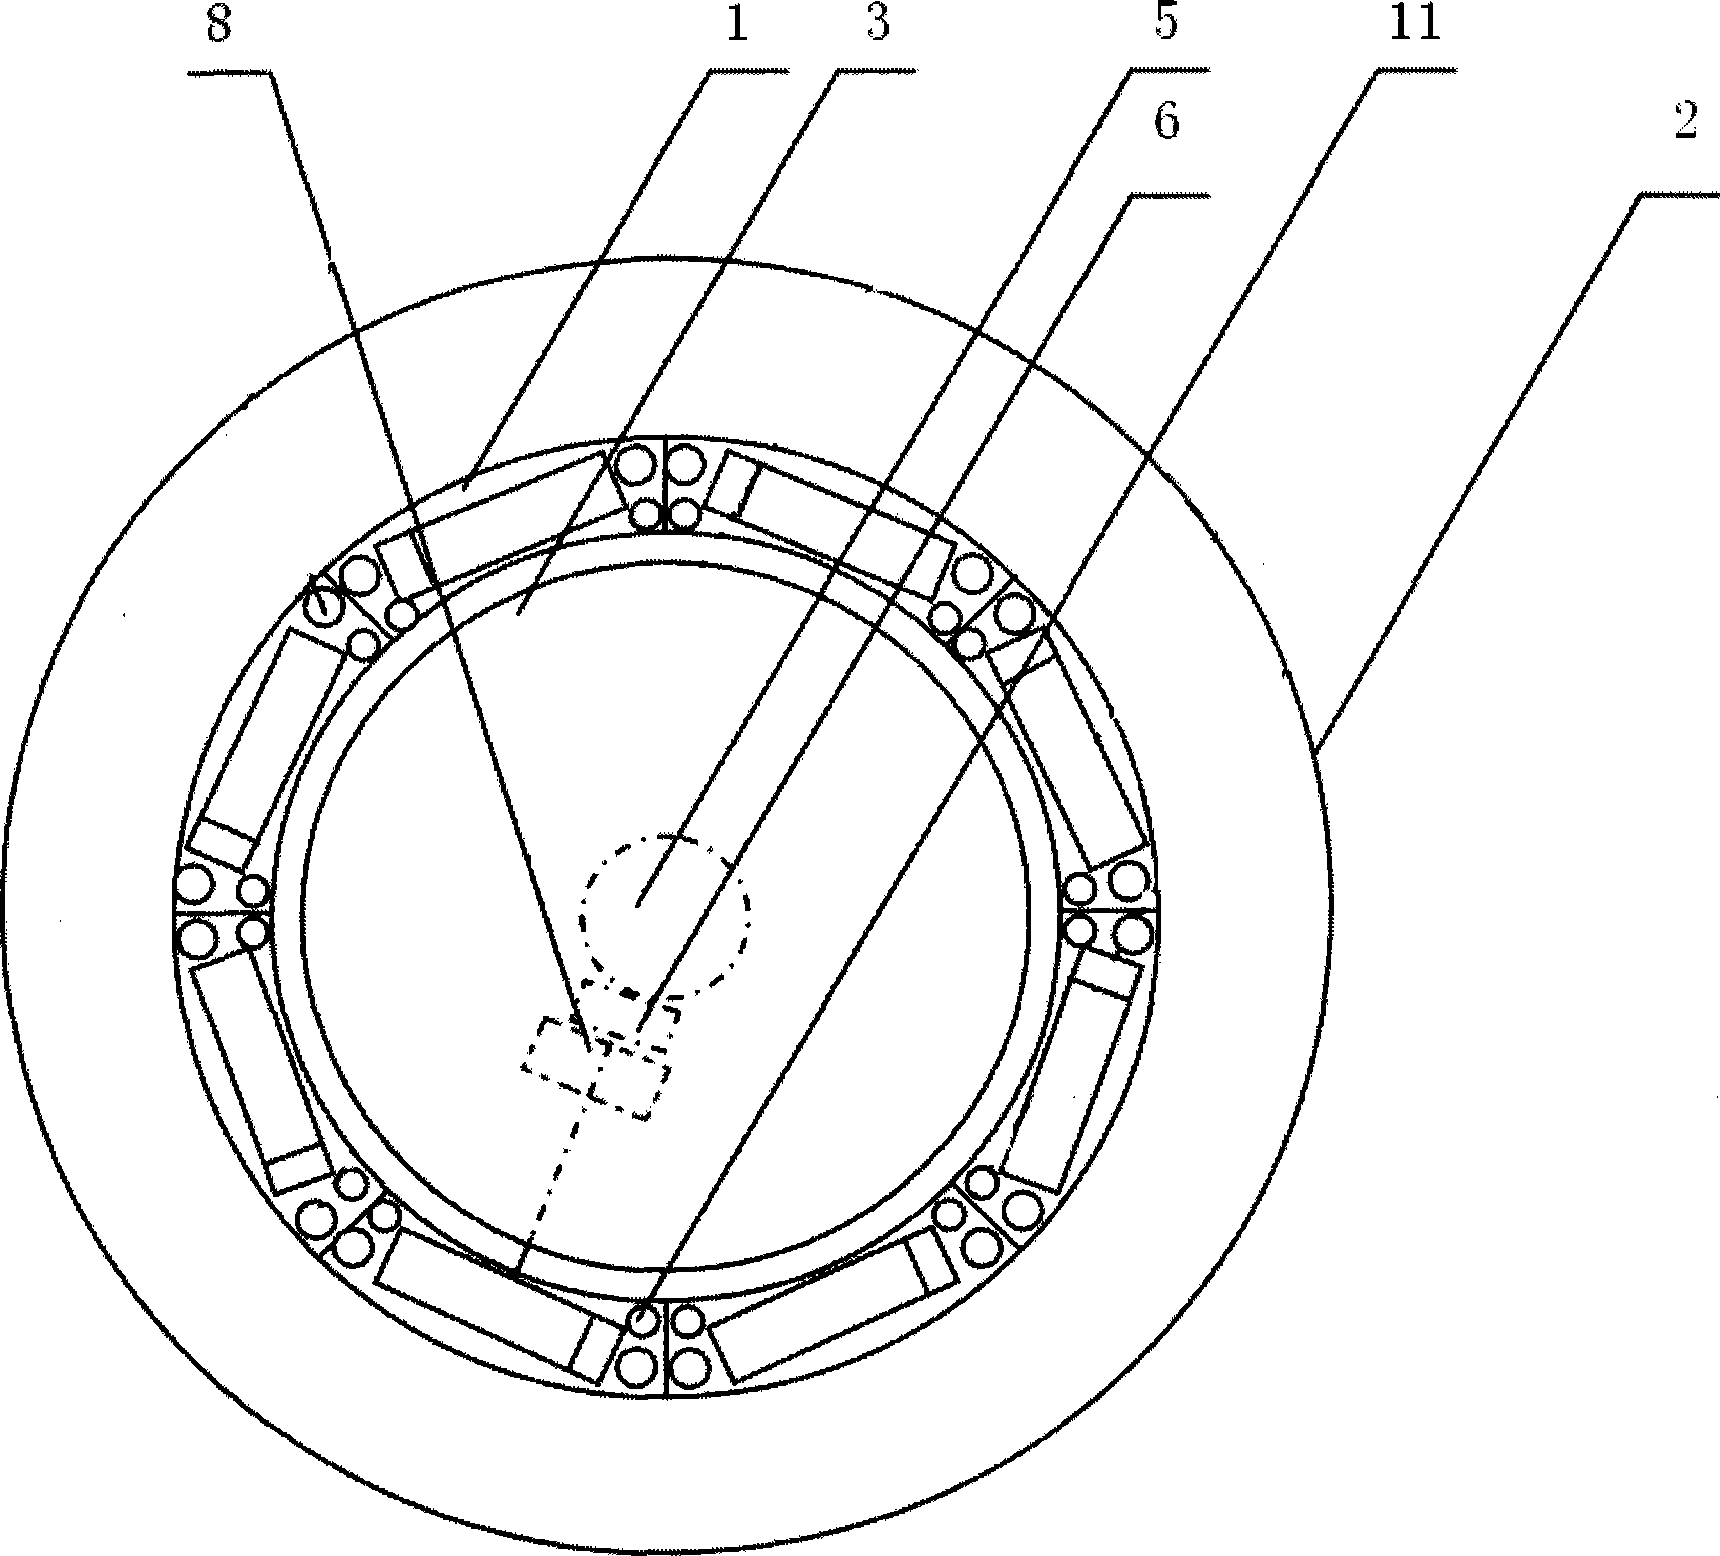 Dining table with control display device